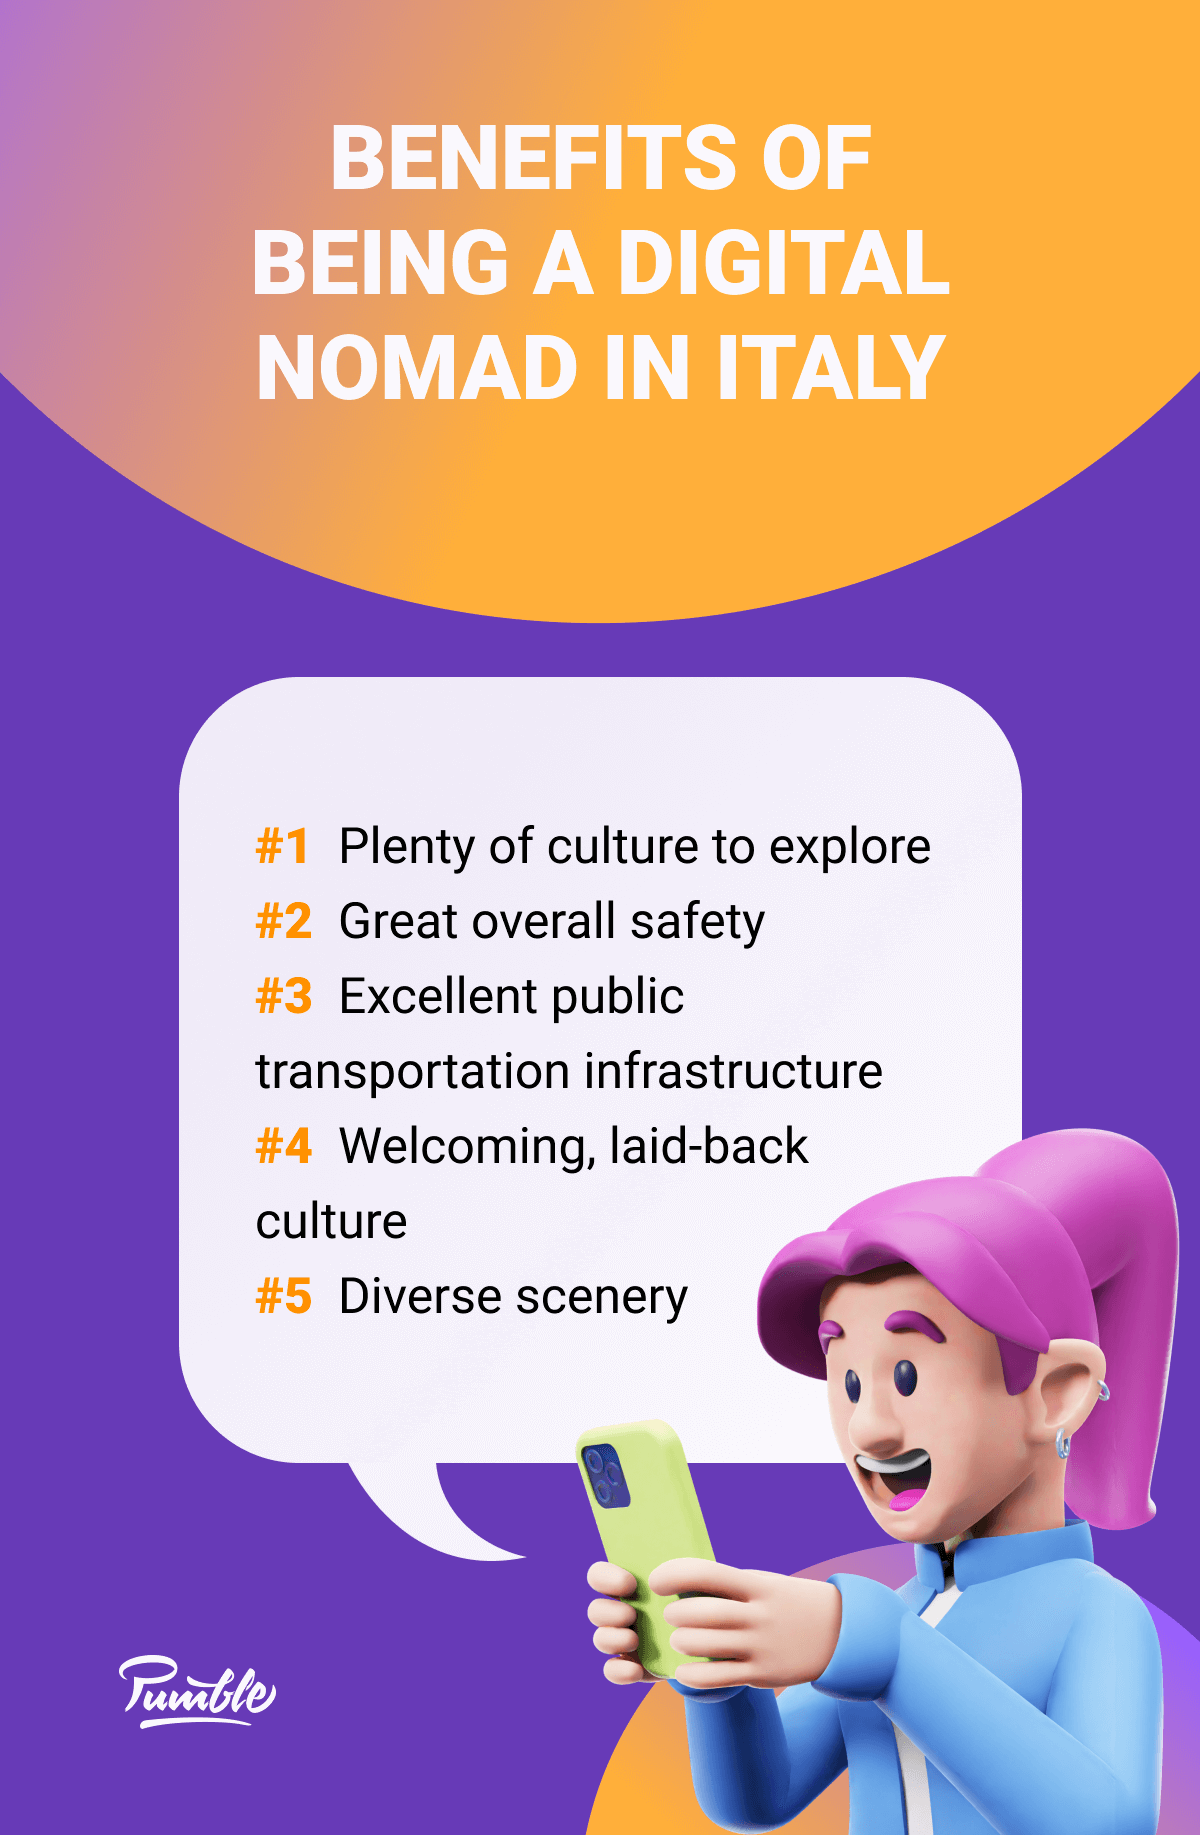 Benefits of being a digital nomad in Italy